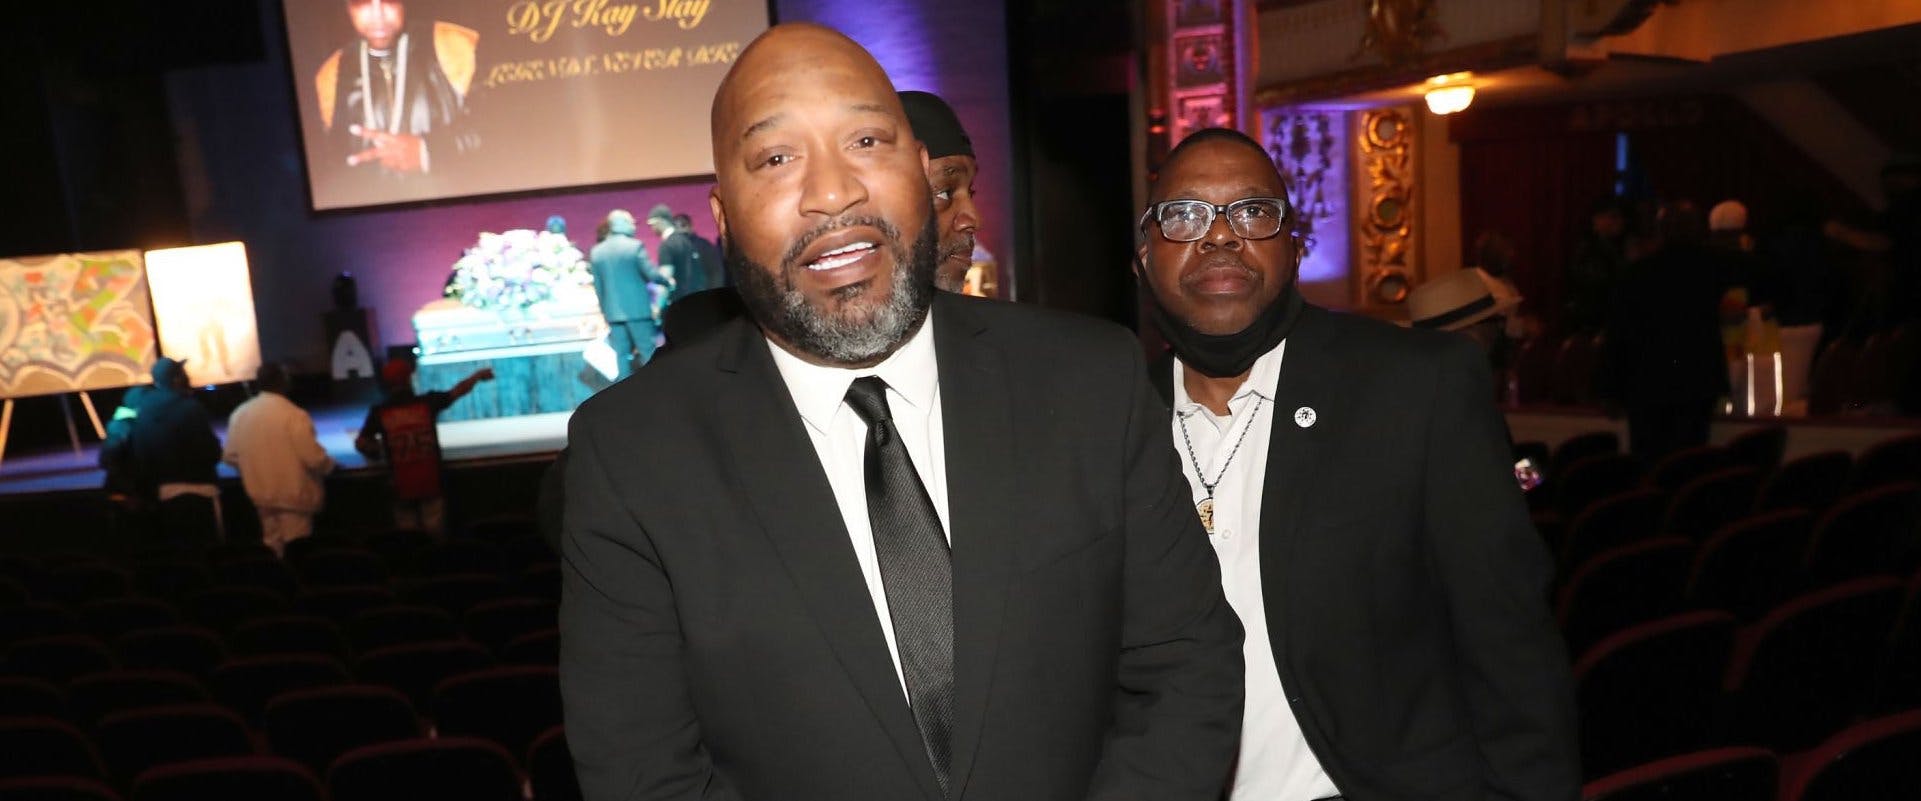 Bun B attends the memorial service for DJ Kay Slay at The Apollo Theater on April 24, 2022 in New York City. (Photo by Johnny Nunez/Getty Images)